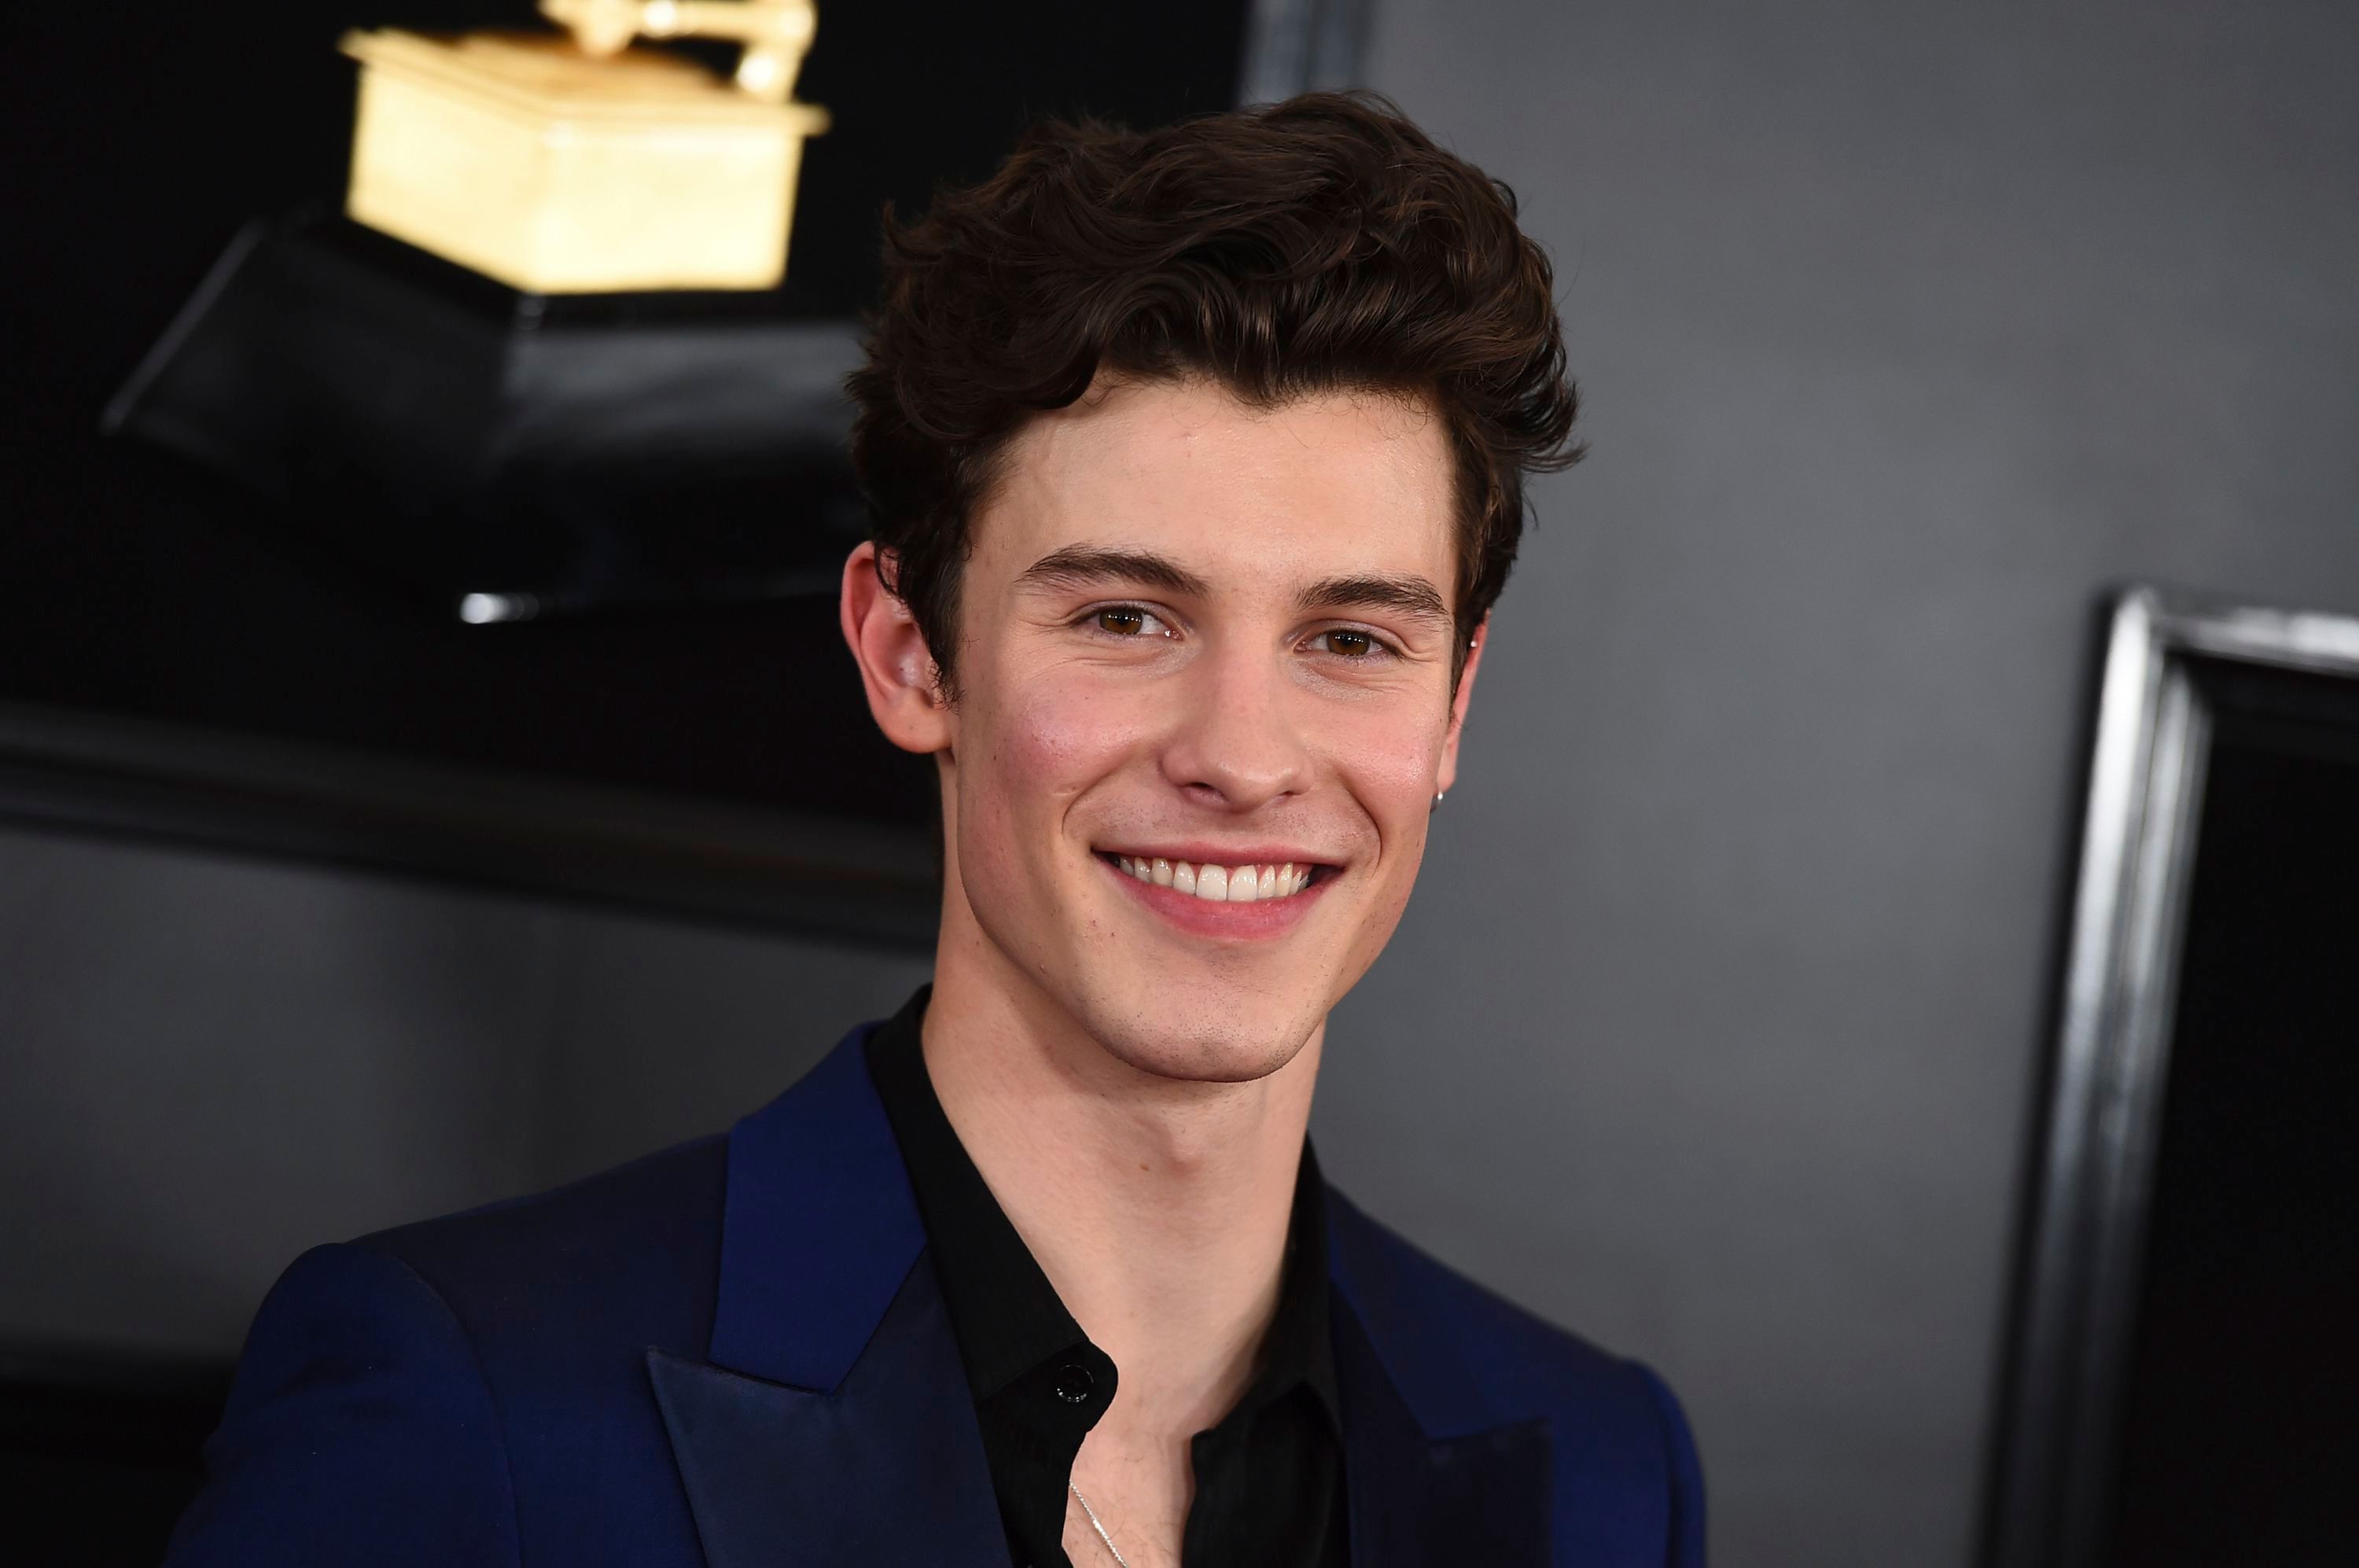 shawn-mendes-originally-wanted-to-be-an-actor.jpg